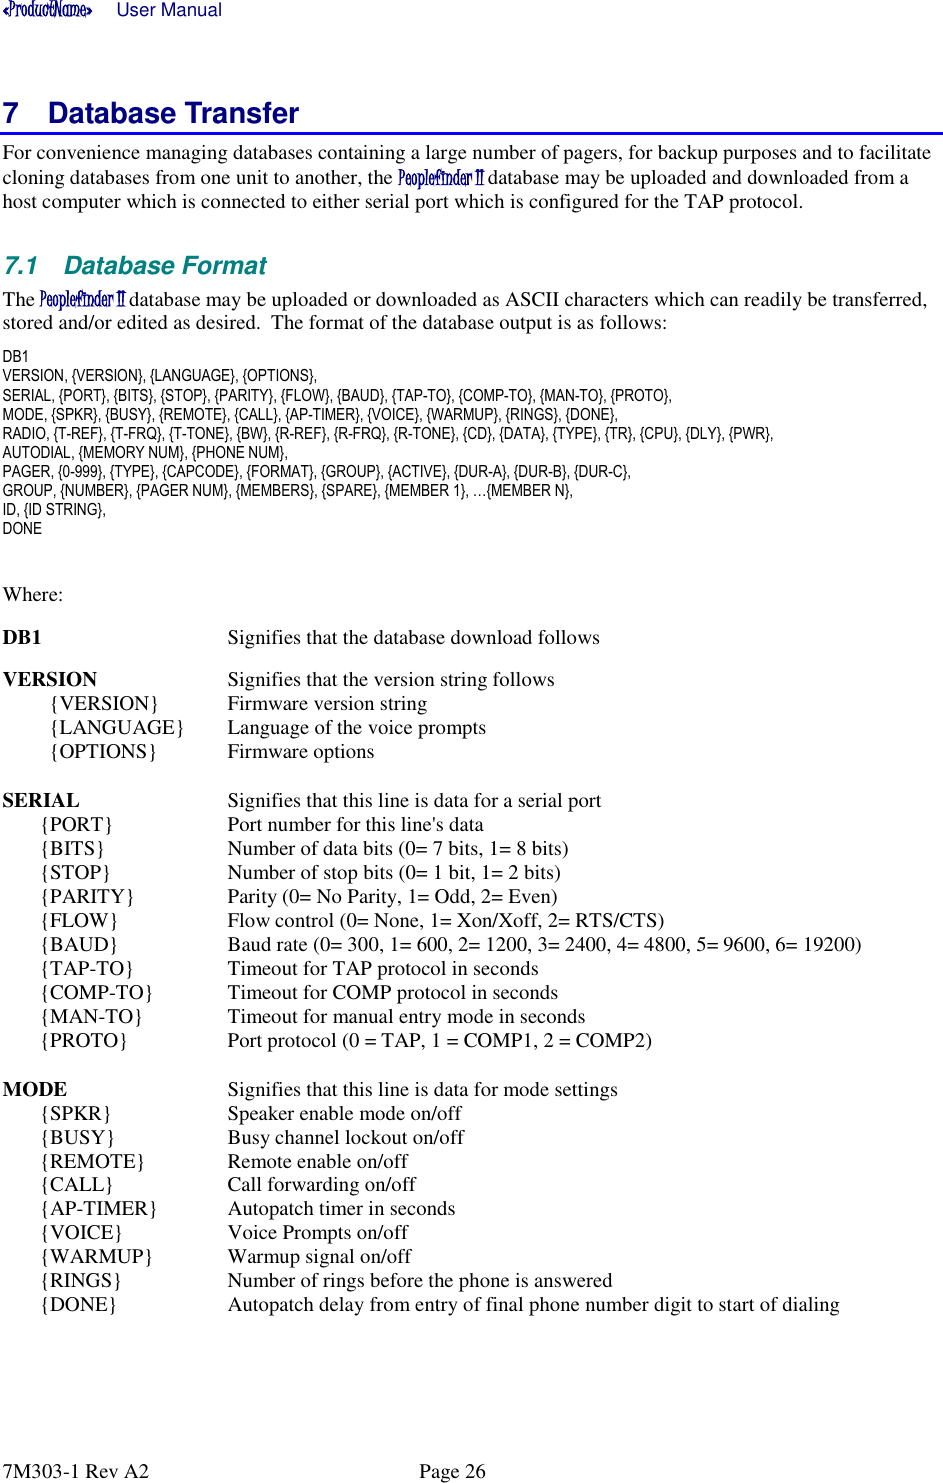 «ProductName»      User Manual      7M303-1 Rev A2  Page 26 7  Database Transfer For convenience managing databases containing a large number of pagers, for backup purposes and to facilitate cloning databases from one unit to another, the Peoplefinder II database may be uploaded and downloaded from a host computer which is connected to either serial port which is configured for the TAP protocol. 7.1  Database Format The Peoplefinder II database may be uploaded or downloaded as ASCII characters which can readily be transferred, stored and/or edited as desired.  The format of the database output is as follows: DB1 VERSION, {VERSION}, {LANGUAGE}, {OPTIONS},  SERIAL, {PORT}, {BITS}, {STOP}, {PARITY}, {FLOW}, {BAUD}, {TAP-TO}, {COMP-TO}, {MAN-TO}, {PROTO},  MODE, {SPKR}, {BUSY}, {REMOTE}, {CALL}, {AP-TIMER}, {VOICE}, {WARMUP}, {RINGS}, {DONE}, RADIO, {T-REF}, {T-FRQ}, {T-TONE}, {BW}, {R-REF}, {R-FRQ}, {R-TONE}, {CD}, {DATA}, {TYPE}, {TR}, {CPU}, {DLY}, {PWR},    AUTODIAL, {MEMORY NUM}, {PHONE NUM},  PAGER, {0-999}, {TYPE}, {CAPCODE}, {FORMAT}, {GROUP}, {ACTIVE}, {DUR-A}, {DUR-B}, {DUR-C},  GROUP, {NUMBER}, {PAGER NUM}, {MEMBERS}, {SPARE}, {MEMBER 1}, …{MEMBER N},  ID, {ID STRING},  DONE  Where: DB1     Signifies that the database download follows VERSION    Signifies that the version string follows {VERSION}  Firmware version string {LANGUAGE}  Language of the voice prompts {OPTIONS}  Firmware options SERIAL    Signifies that this line is data for a serial port {PORT}    Port number for this line&apos;s data {BITS}    Number of data bits (0= 7 bits, 1= 8 bits) {STOP}    Number of stop bits (0= 1 bit, 1= 2 bits) {PARITY}    Parity (0= No Parity, 1= Odd, 2= Even) {FLOW}    Flow control (0= None, 1= Xon/Xoff, 2= RTS/CTS) {BAUD}    Baud rate (0= 300, 1= 600, 2= 1200, 3= 2400, 4= 4800, 5= 9600, 6= 19200) {TAP-TO}    Timeout for TAP protocol in seconds {COMP-TO}  Timeout for COMP protocol in seconds {MAN-TO}    Timeout for manual entry mode in seconds {PROTO}    Port protocol (0 = TAP, 1 = COMP1, 2 = COMP2) MODE      Signifies that this line is data for mode settings {SPKR}    Speaker enable mode on/off {BUSY}    Busy channel lockout on/off {REMOTE}   Remote enable on/off {CALL}    Call forwarding on/off {AP-TIMER}  Autopatch timer in seconds {VOICE}    Voice Prompts on/off {WARMUP}  Warmup signal on/off {RINGS}    Number of rings before the phone is answered  {DONE}    Autopatch delay from entry of final phone number digit to start of dialing 